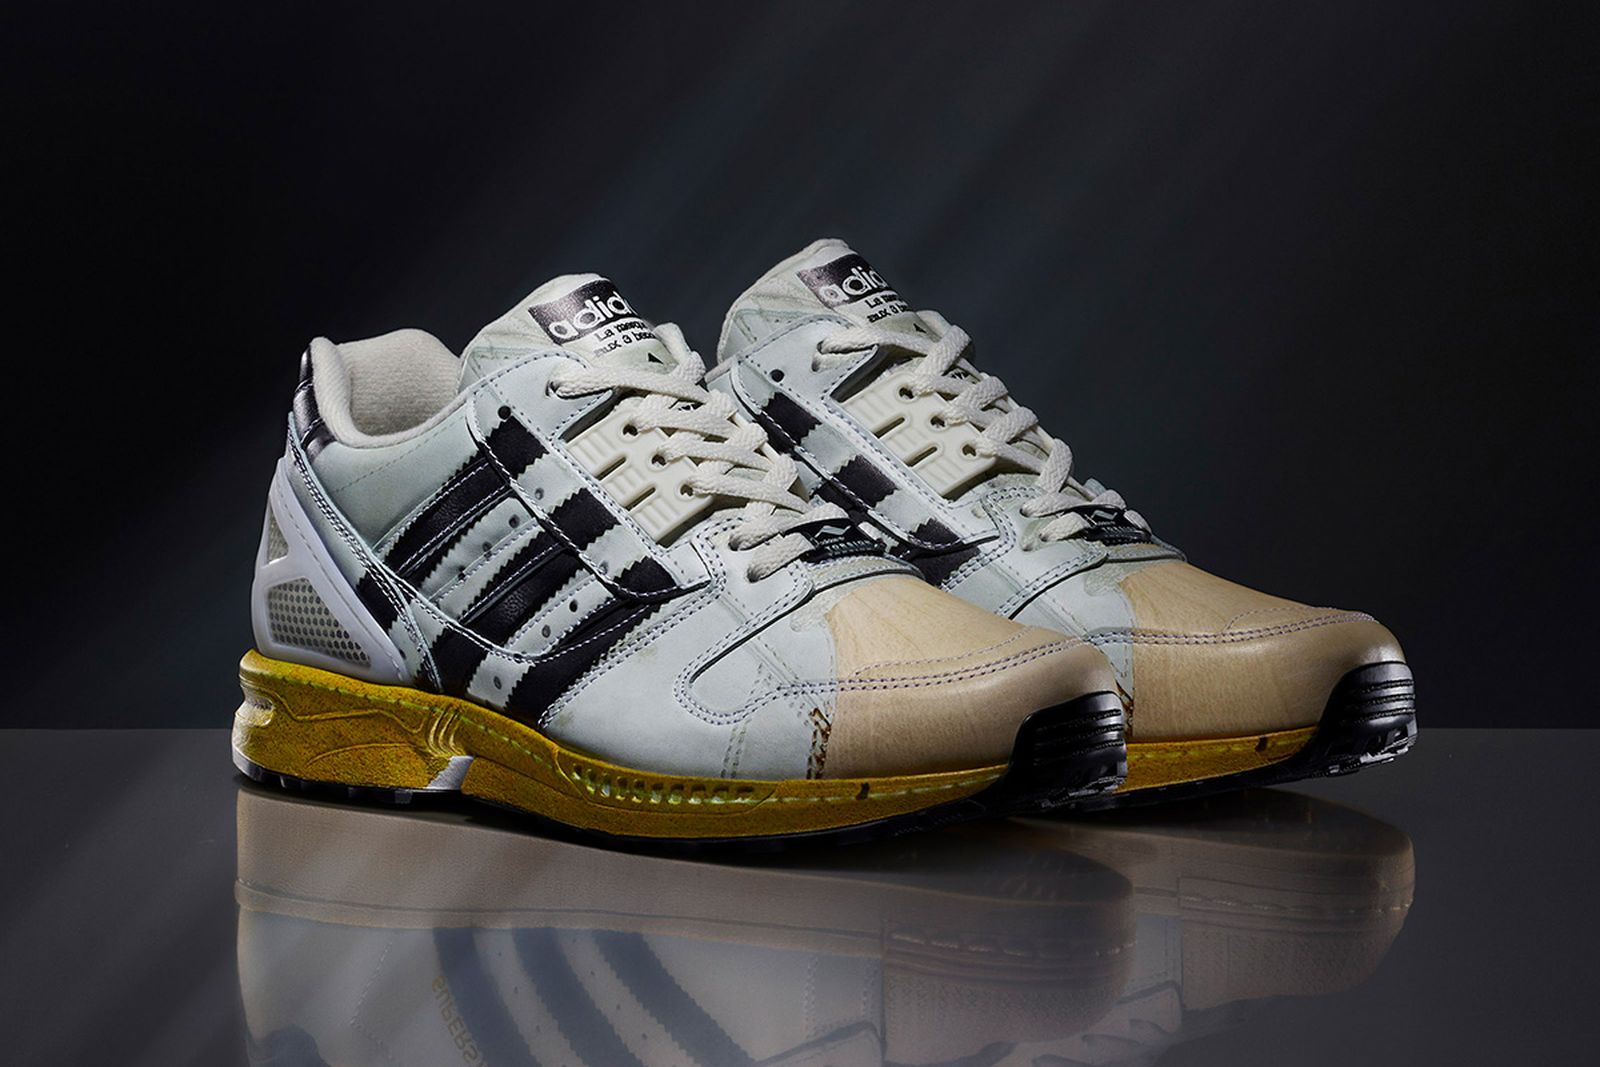 morfine knecht zak adidas Originals Fuses Two Icons With the ZX 8000 Superstar